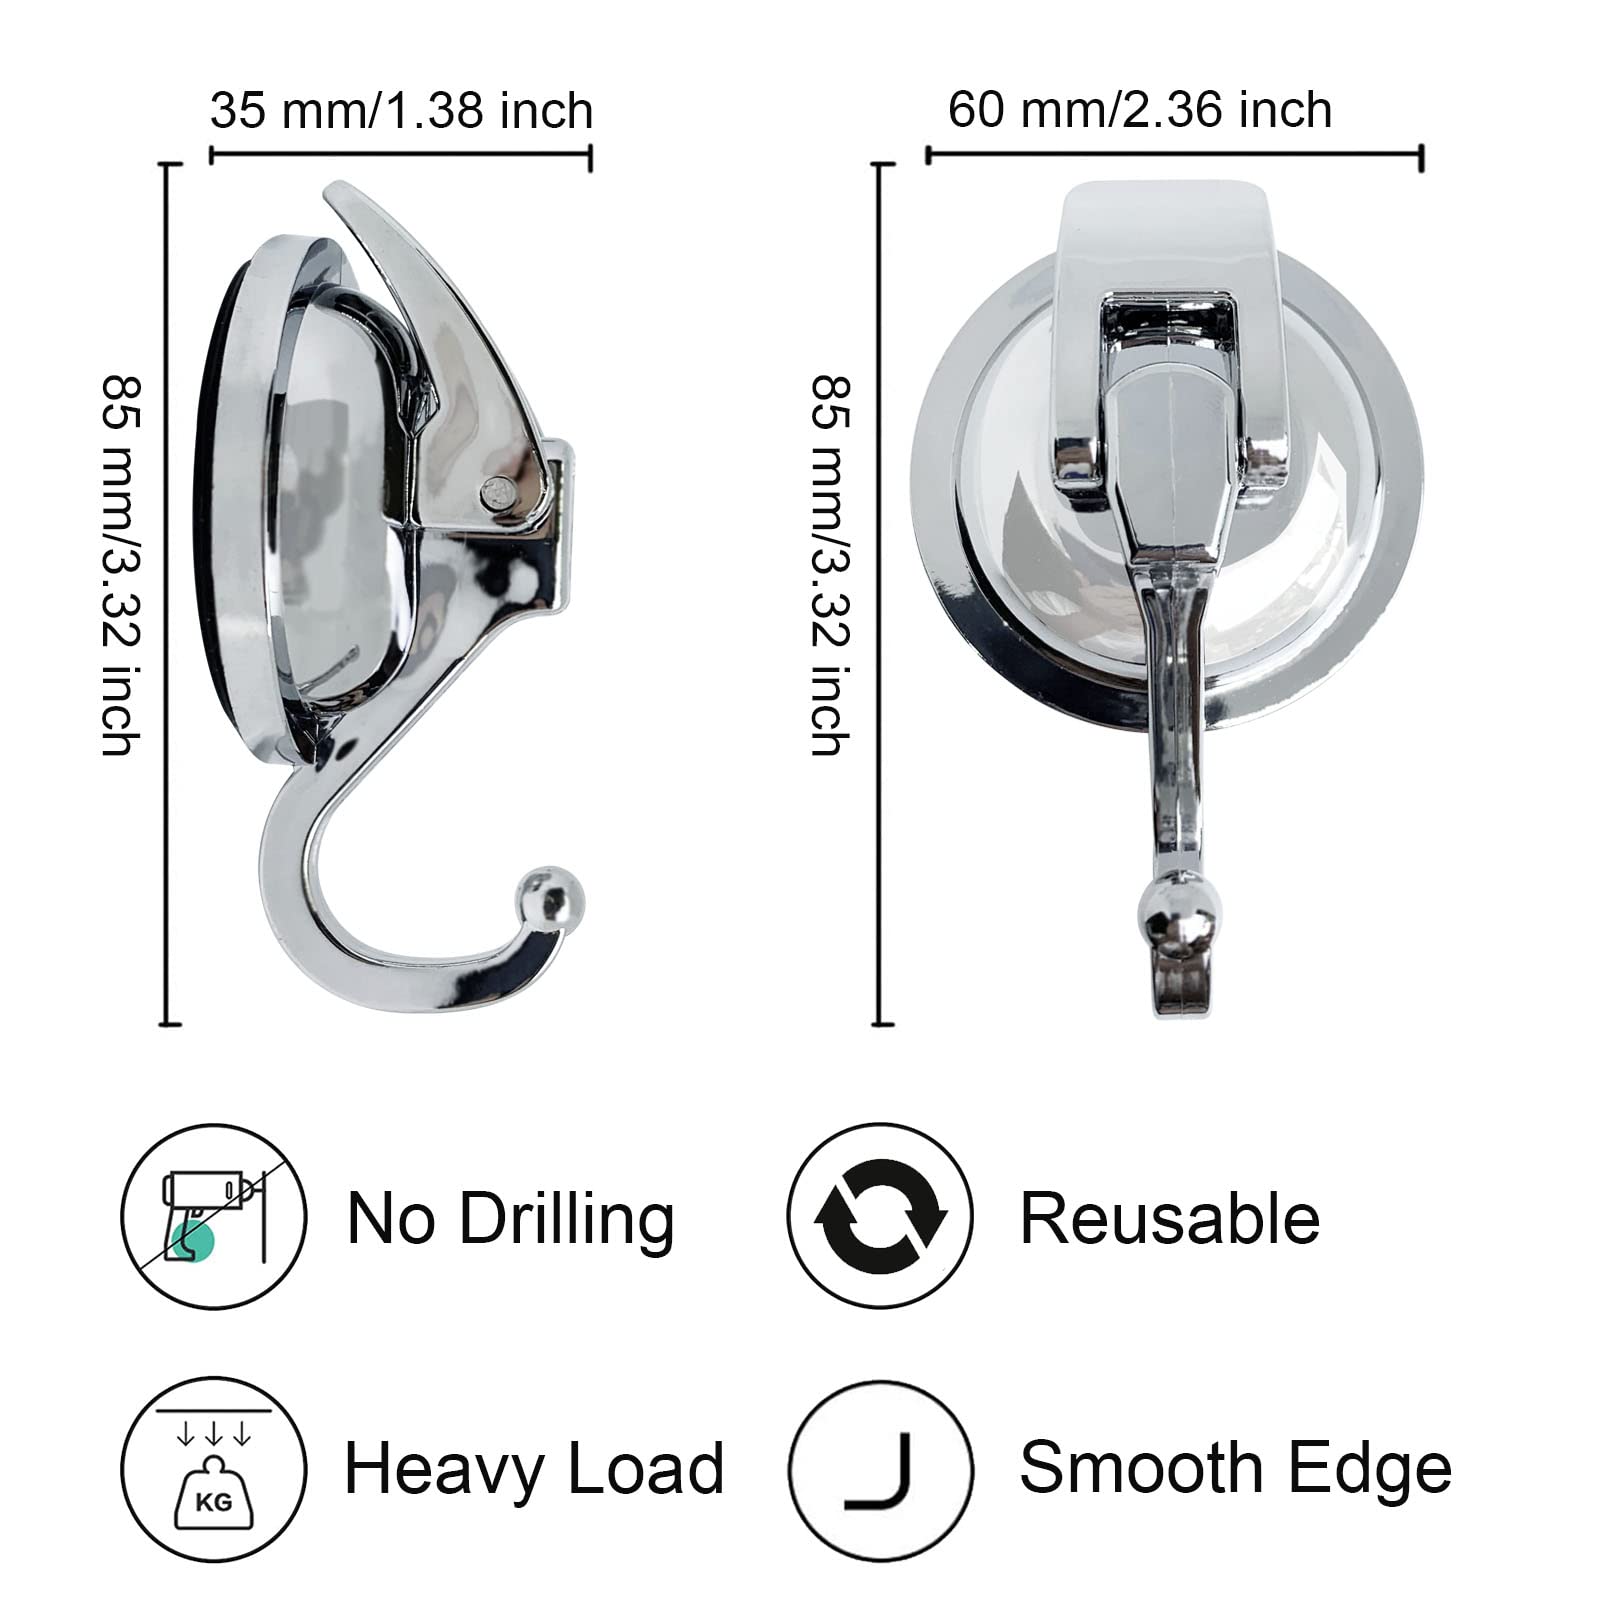 YSSILADI Suction Cup Hooks Heavy Duty Vacuum Suction Shower Hooks Glass Suction Cup Hooks Bathroom Robe Hooks Reusable, No Hole Punched, for Garland Decoration (Silver, 2 Pack)